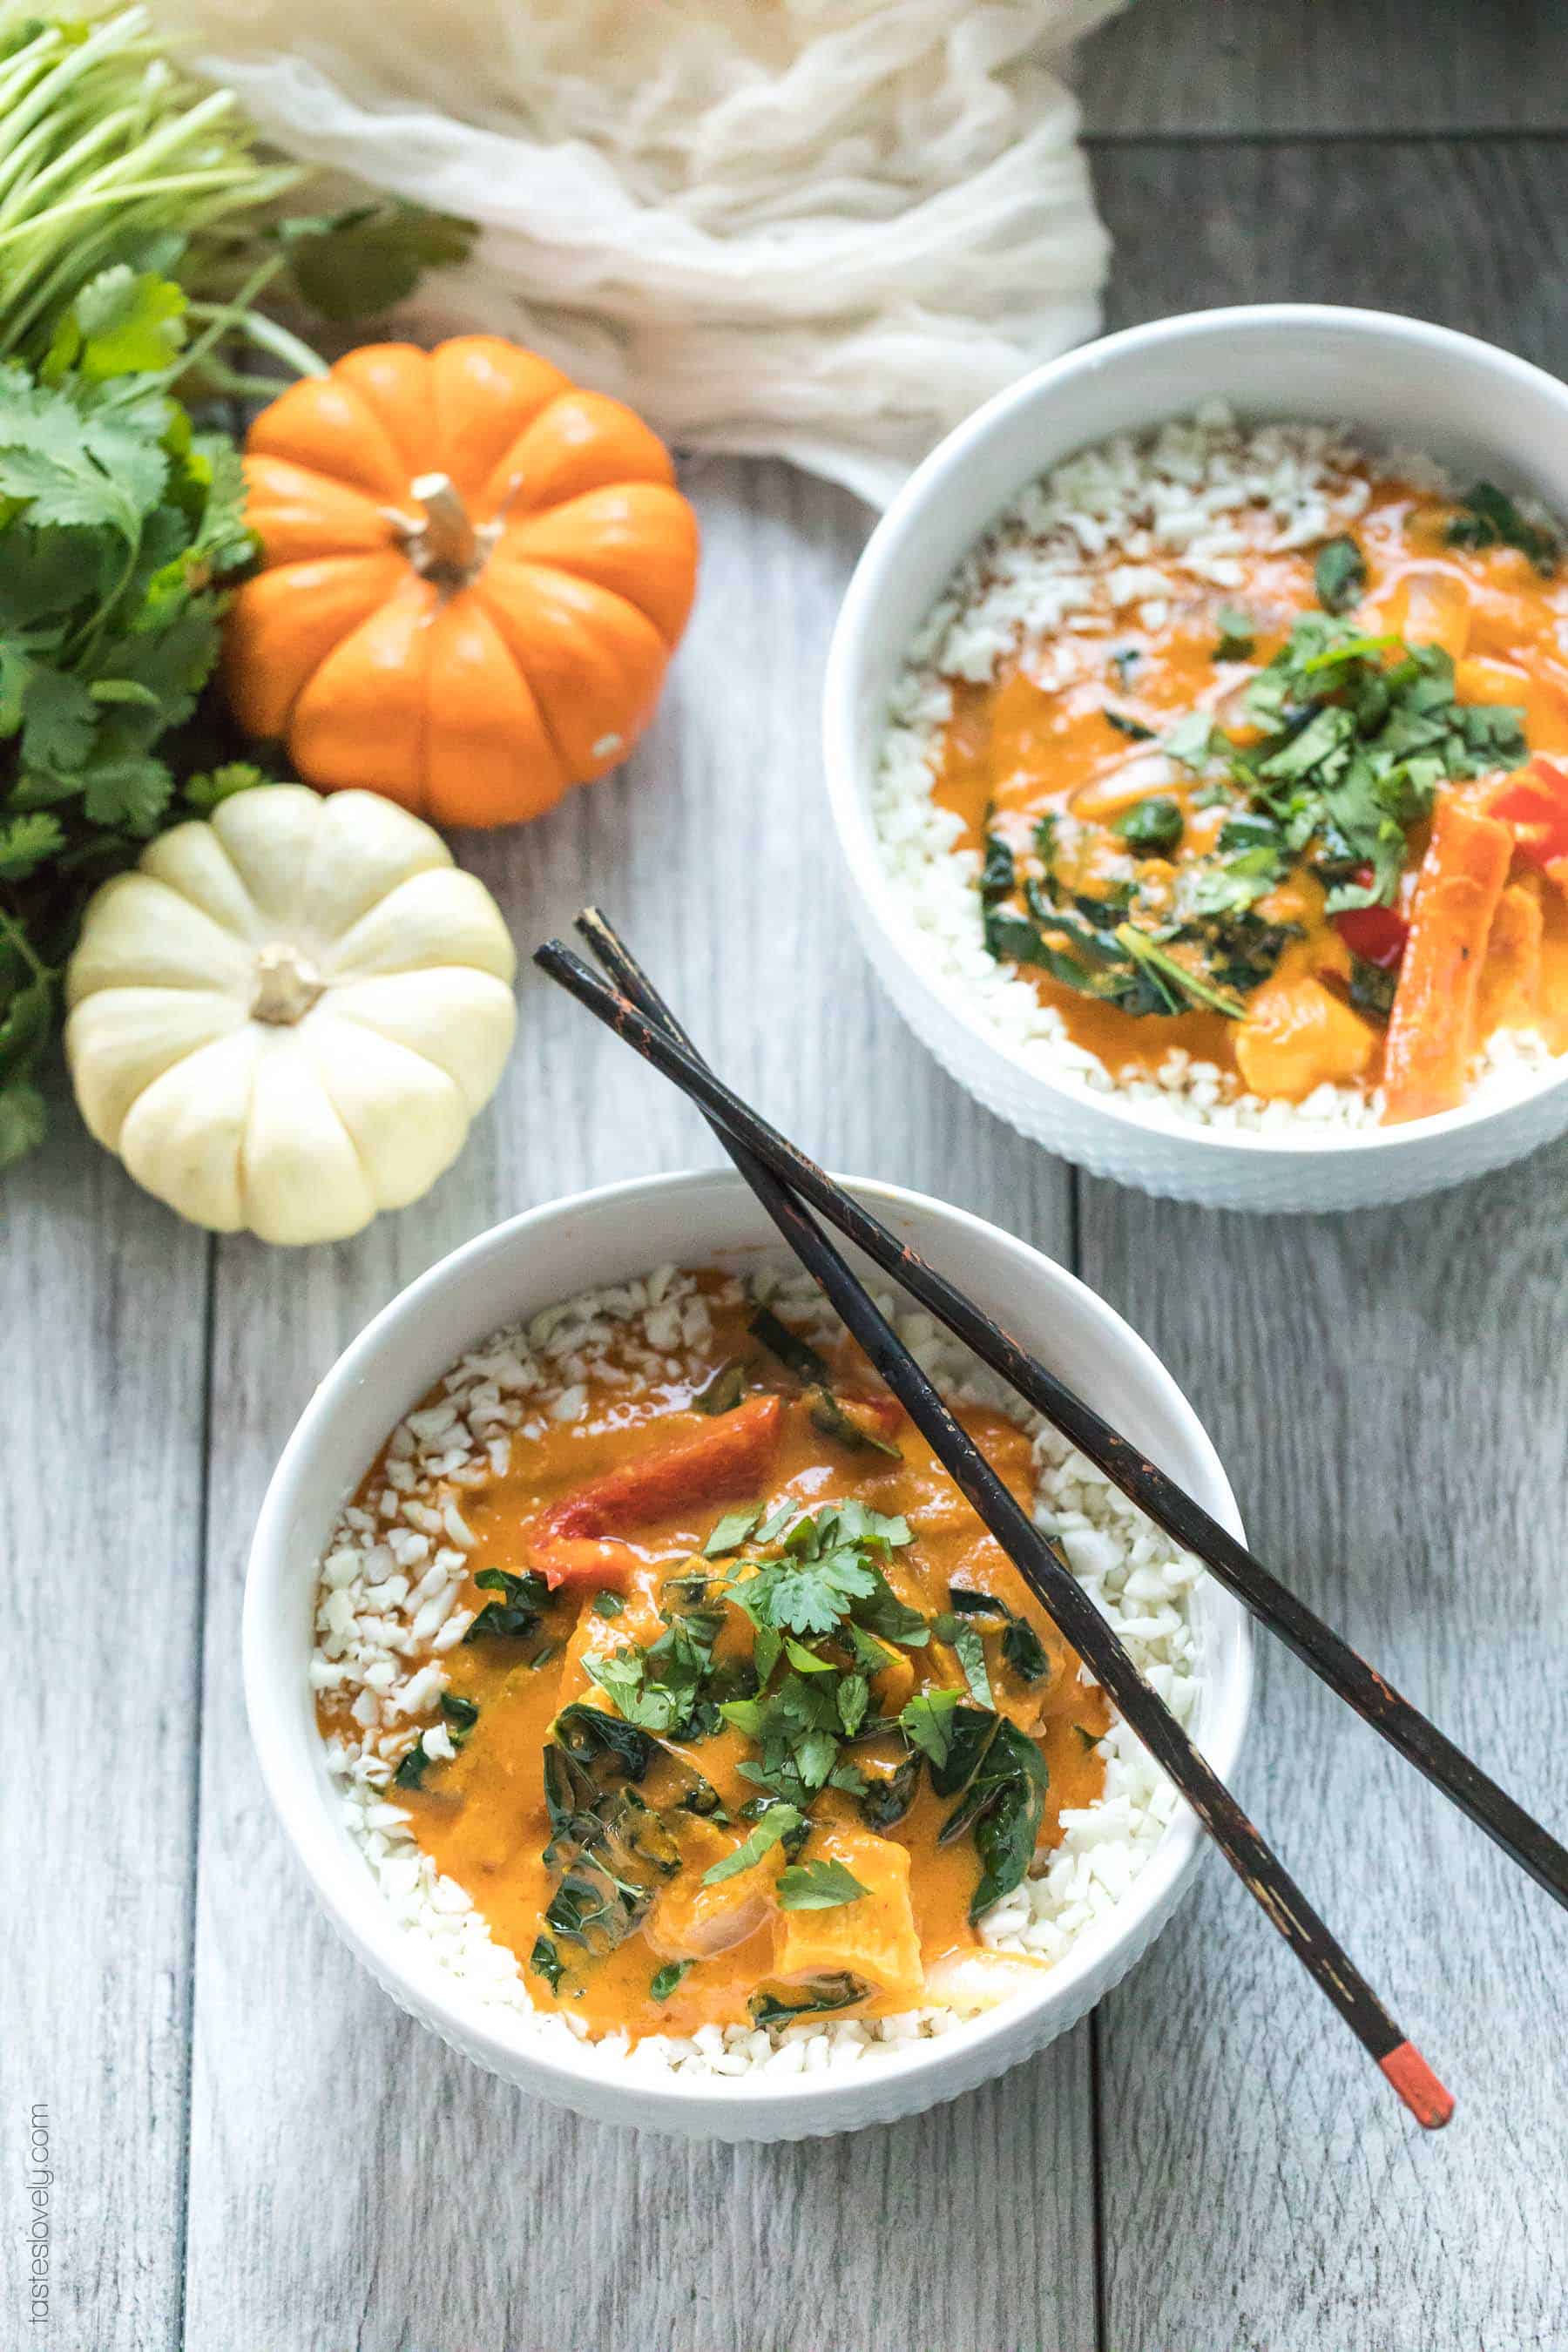 Paleo & Whole30 Pumpkin Coconut Thai Curry - a flavorful and healthy dinner recipe! Gluten free, grain free, dairy free, sugar free, clean eating